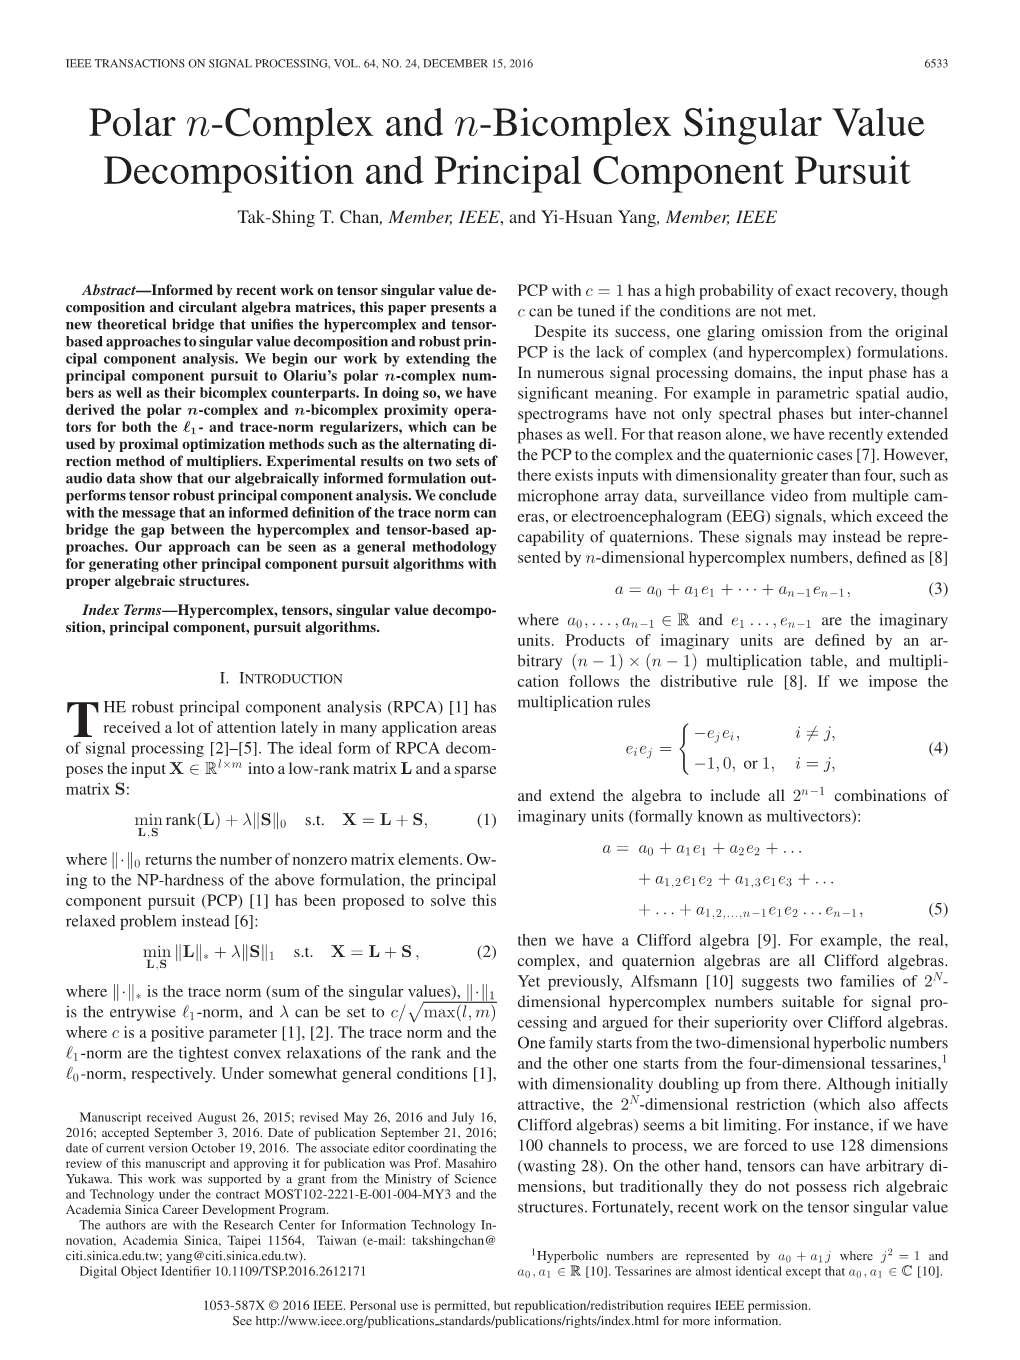 Polar N-Complex and N-Bicomplex Singular Value Decomposition and Principal Component Pursuit Tak-Shing T